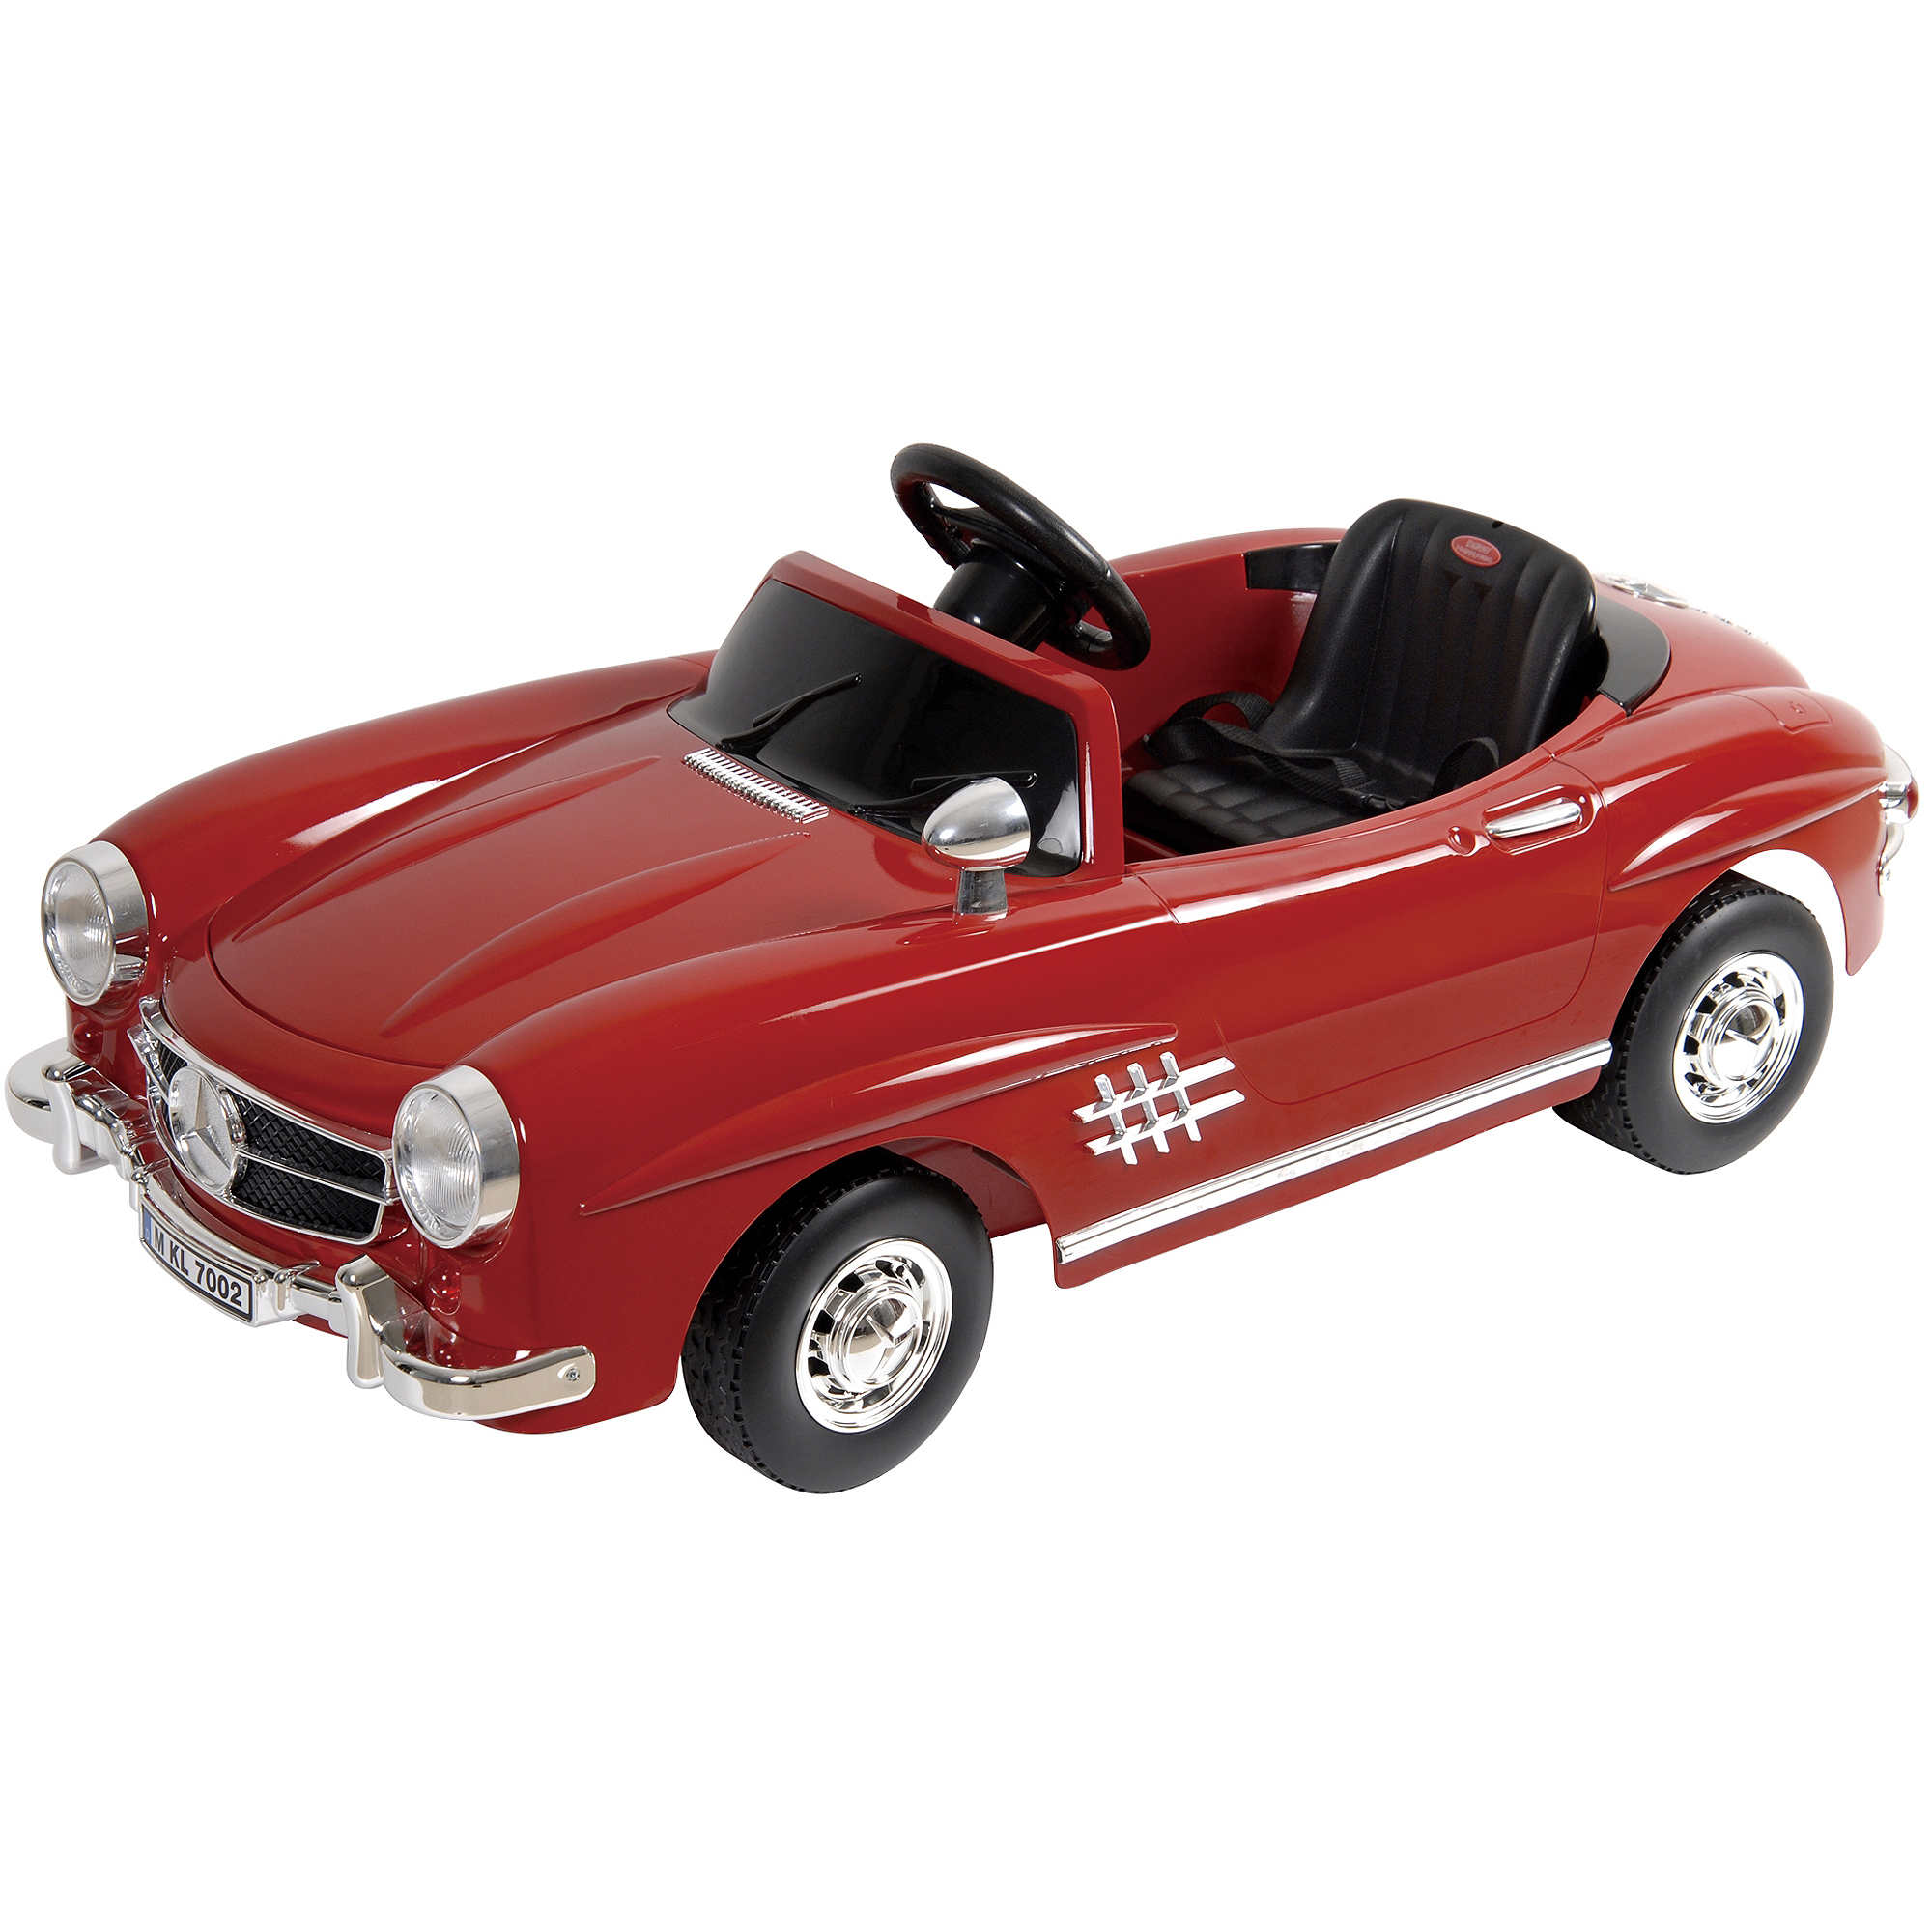 Kalee Mercedes-Benz 300SL W 198 12-Volt Battery-Powered Ride-On, Red - image 1 of 4